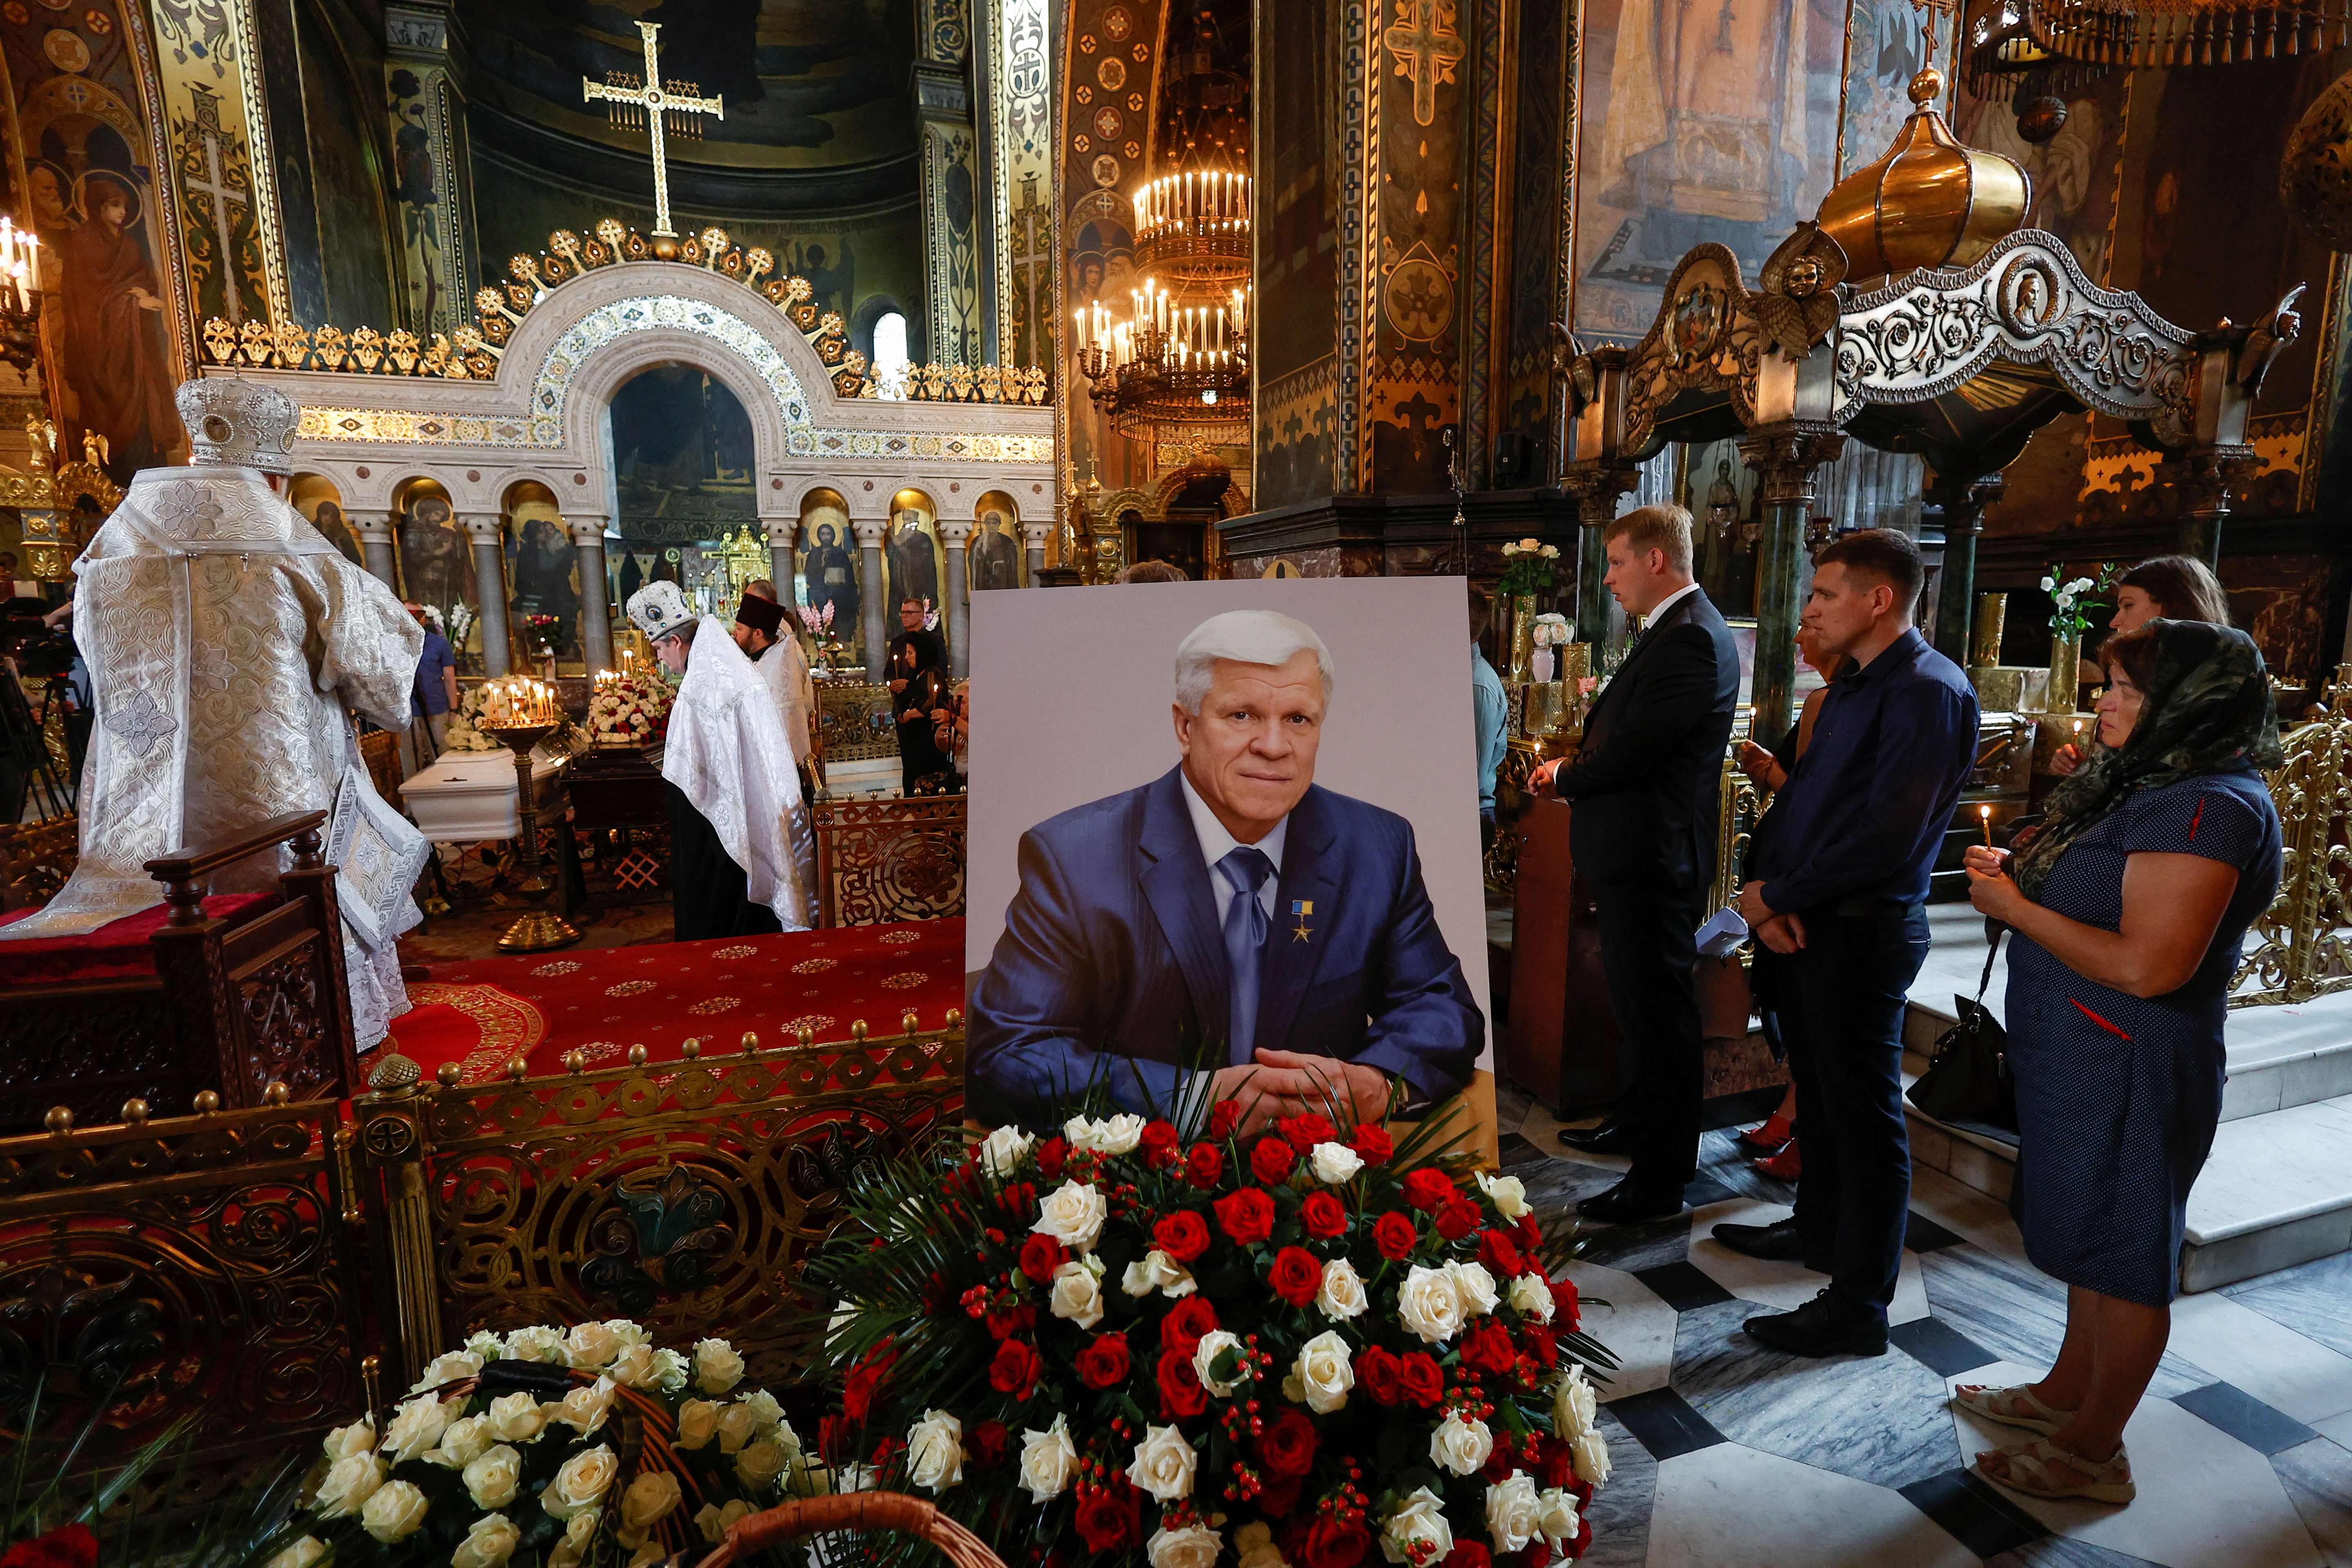 Funeral ceremony for Oleksiy Vadaturskyi and his wife Raisa in Kyiv